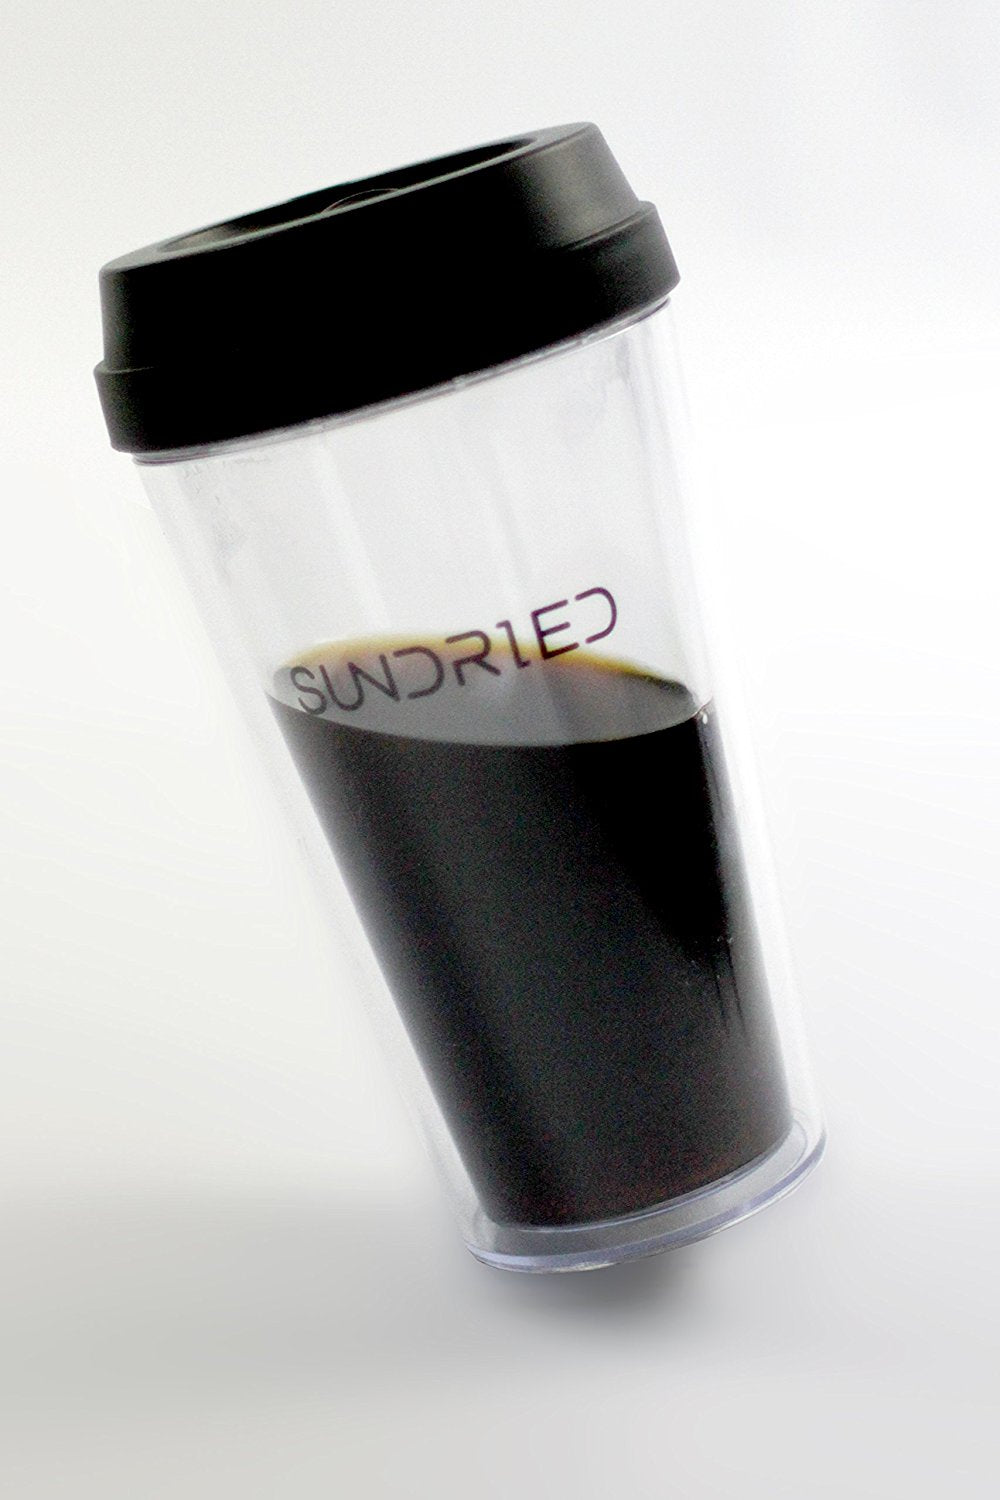 Sundried Reusable Eco Cup Accessories 420 ml SDCUP01 Activewear